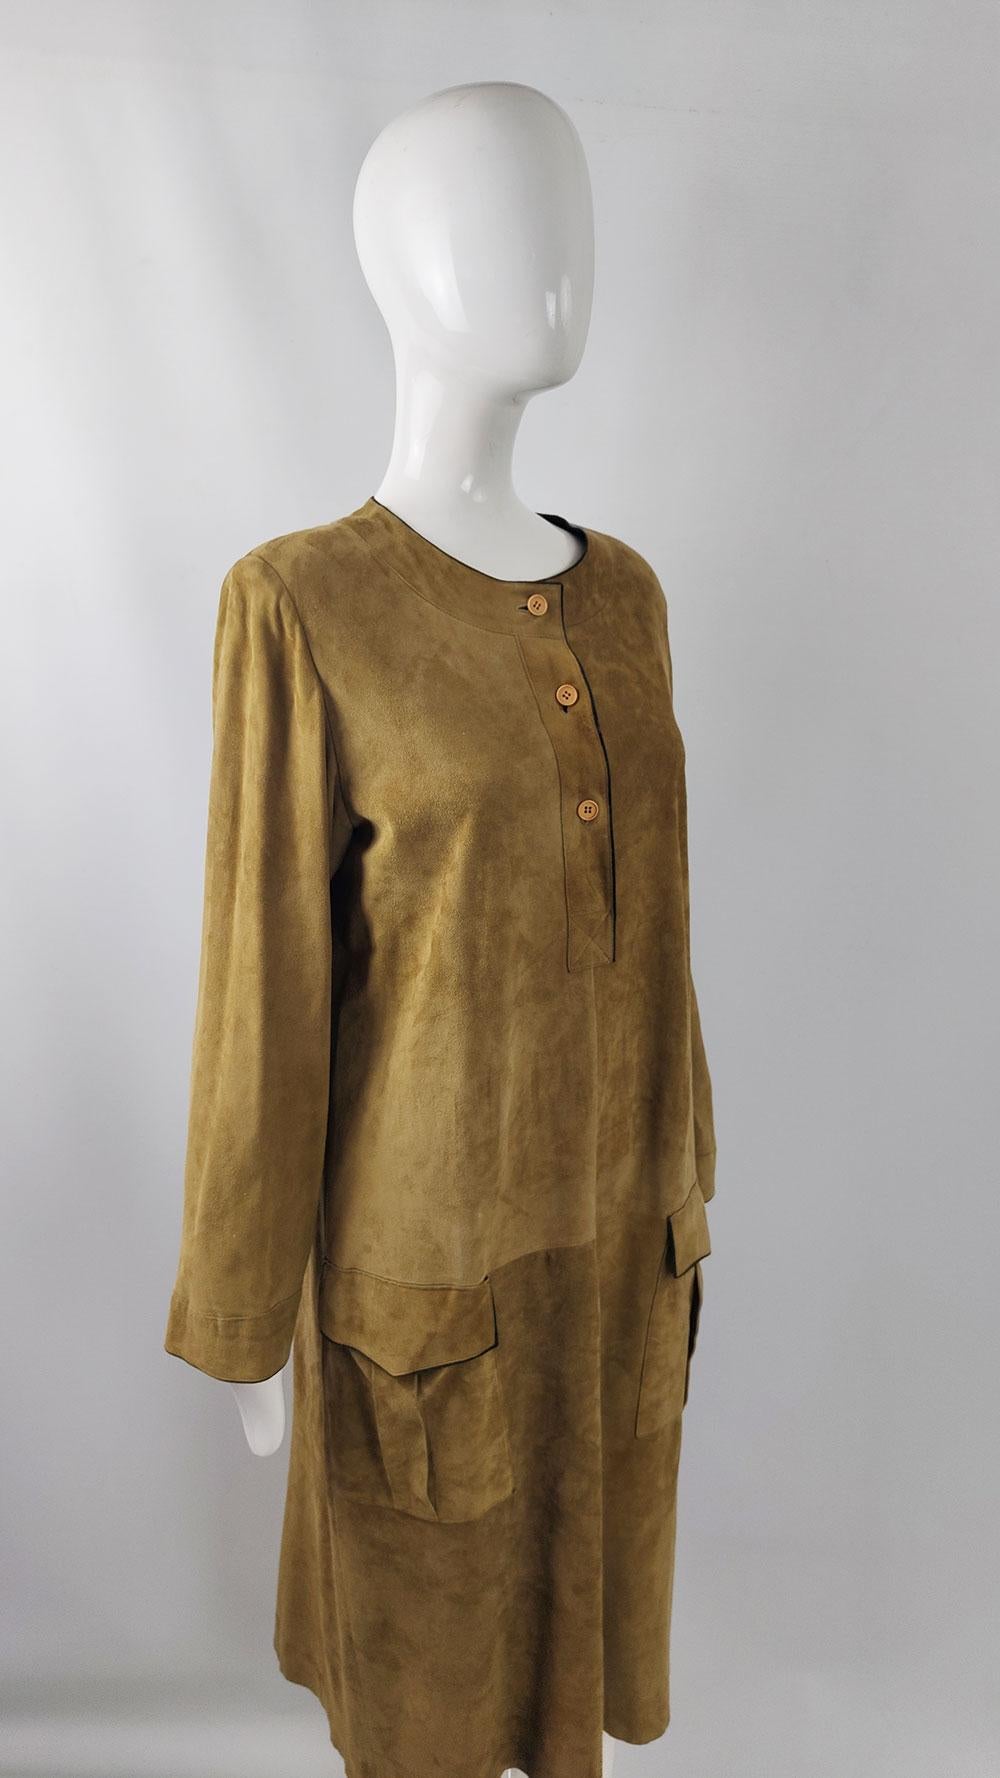 Mario Valentino Vintage Tan & Green Suede Long Sleeve Shift Dress For Sale 4